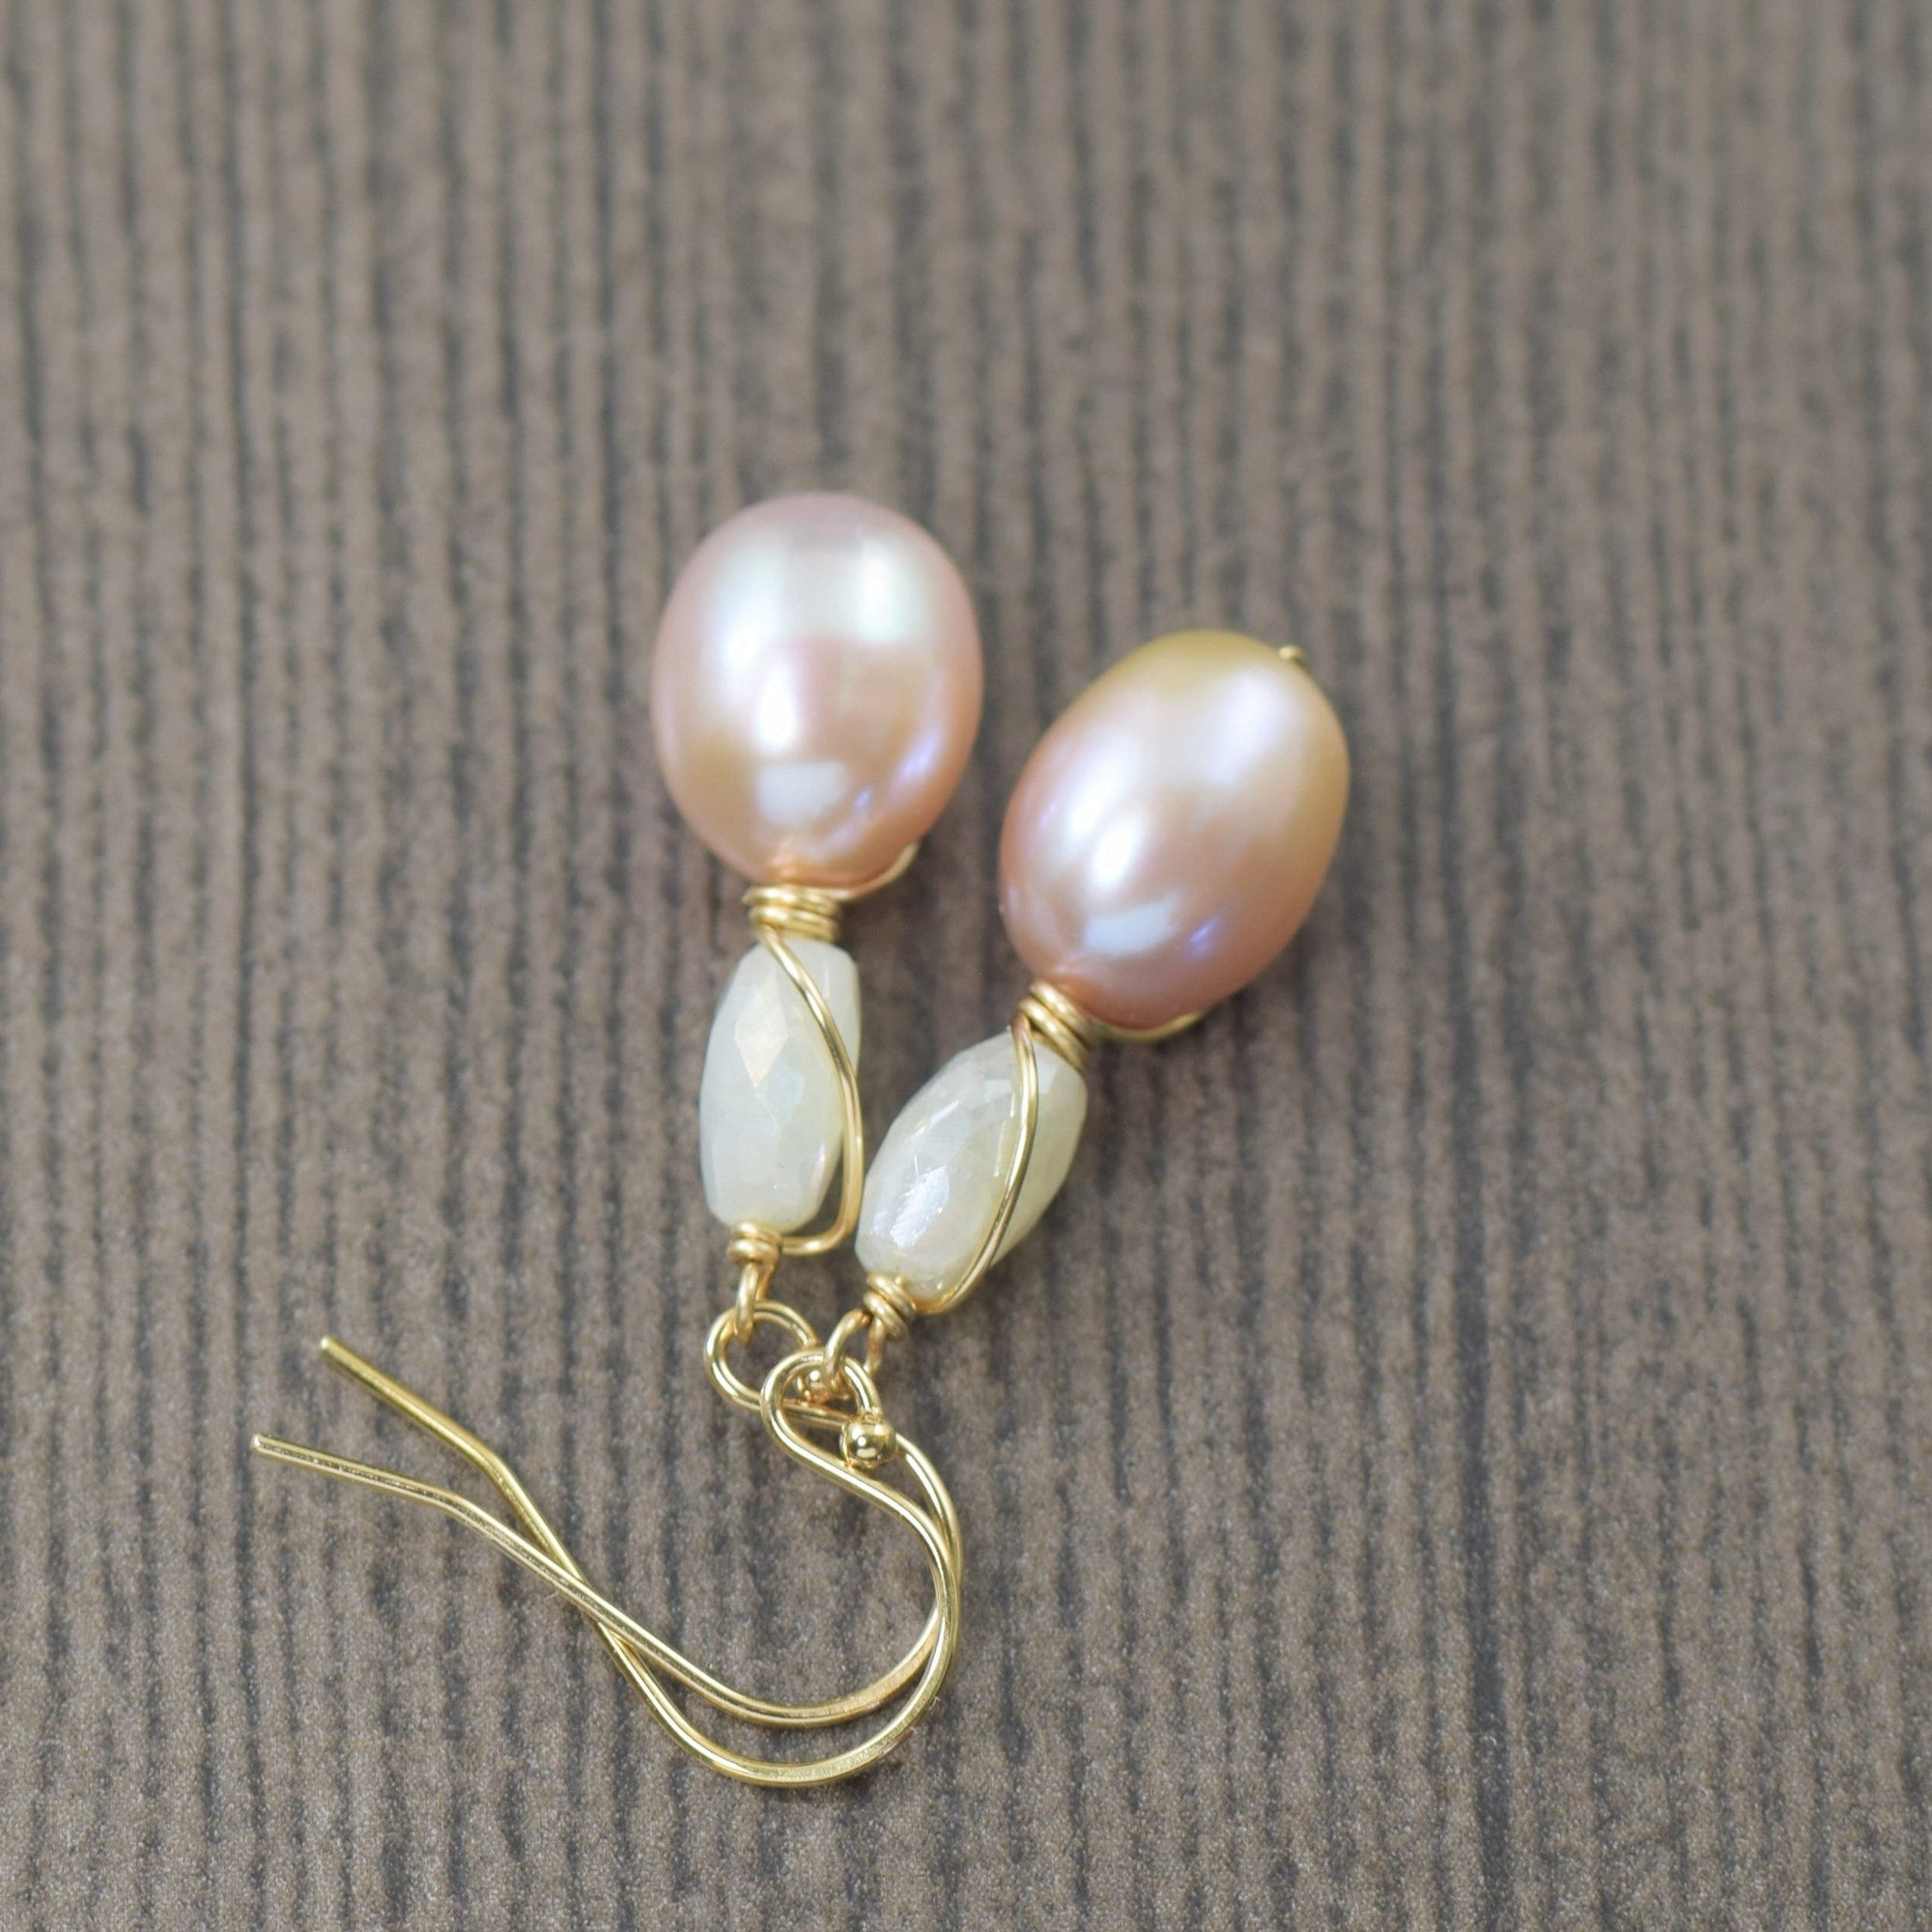 Light pink pearl earrings wire wrapped in gold filled accented by silverite gemstones